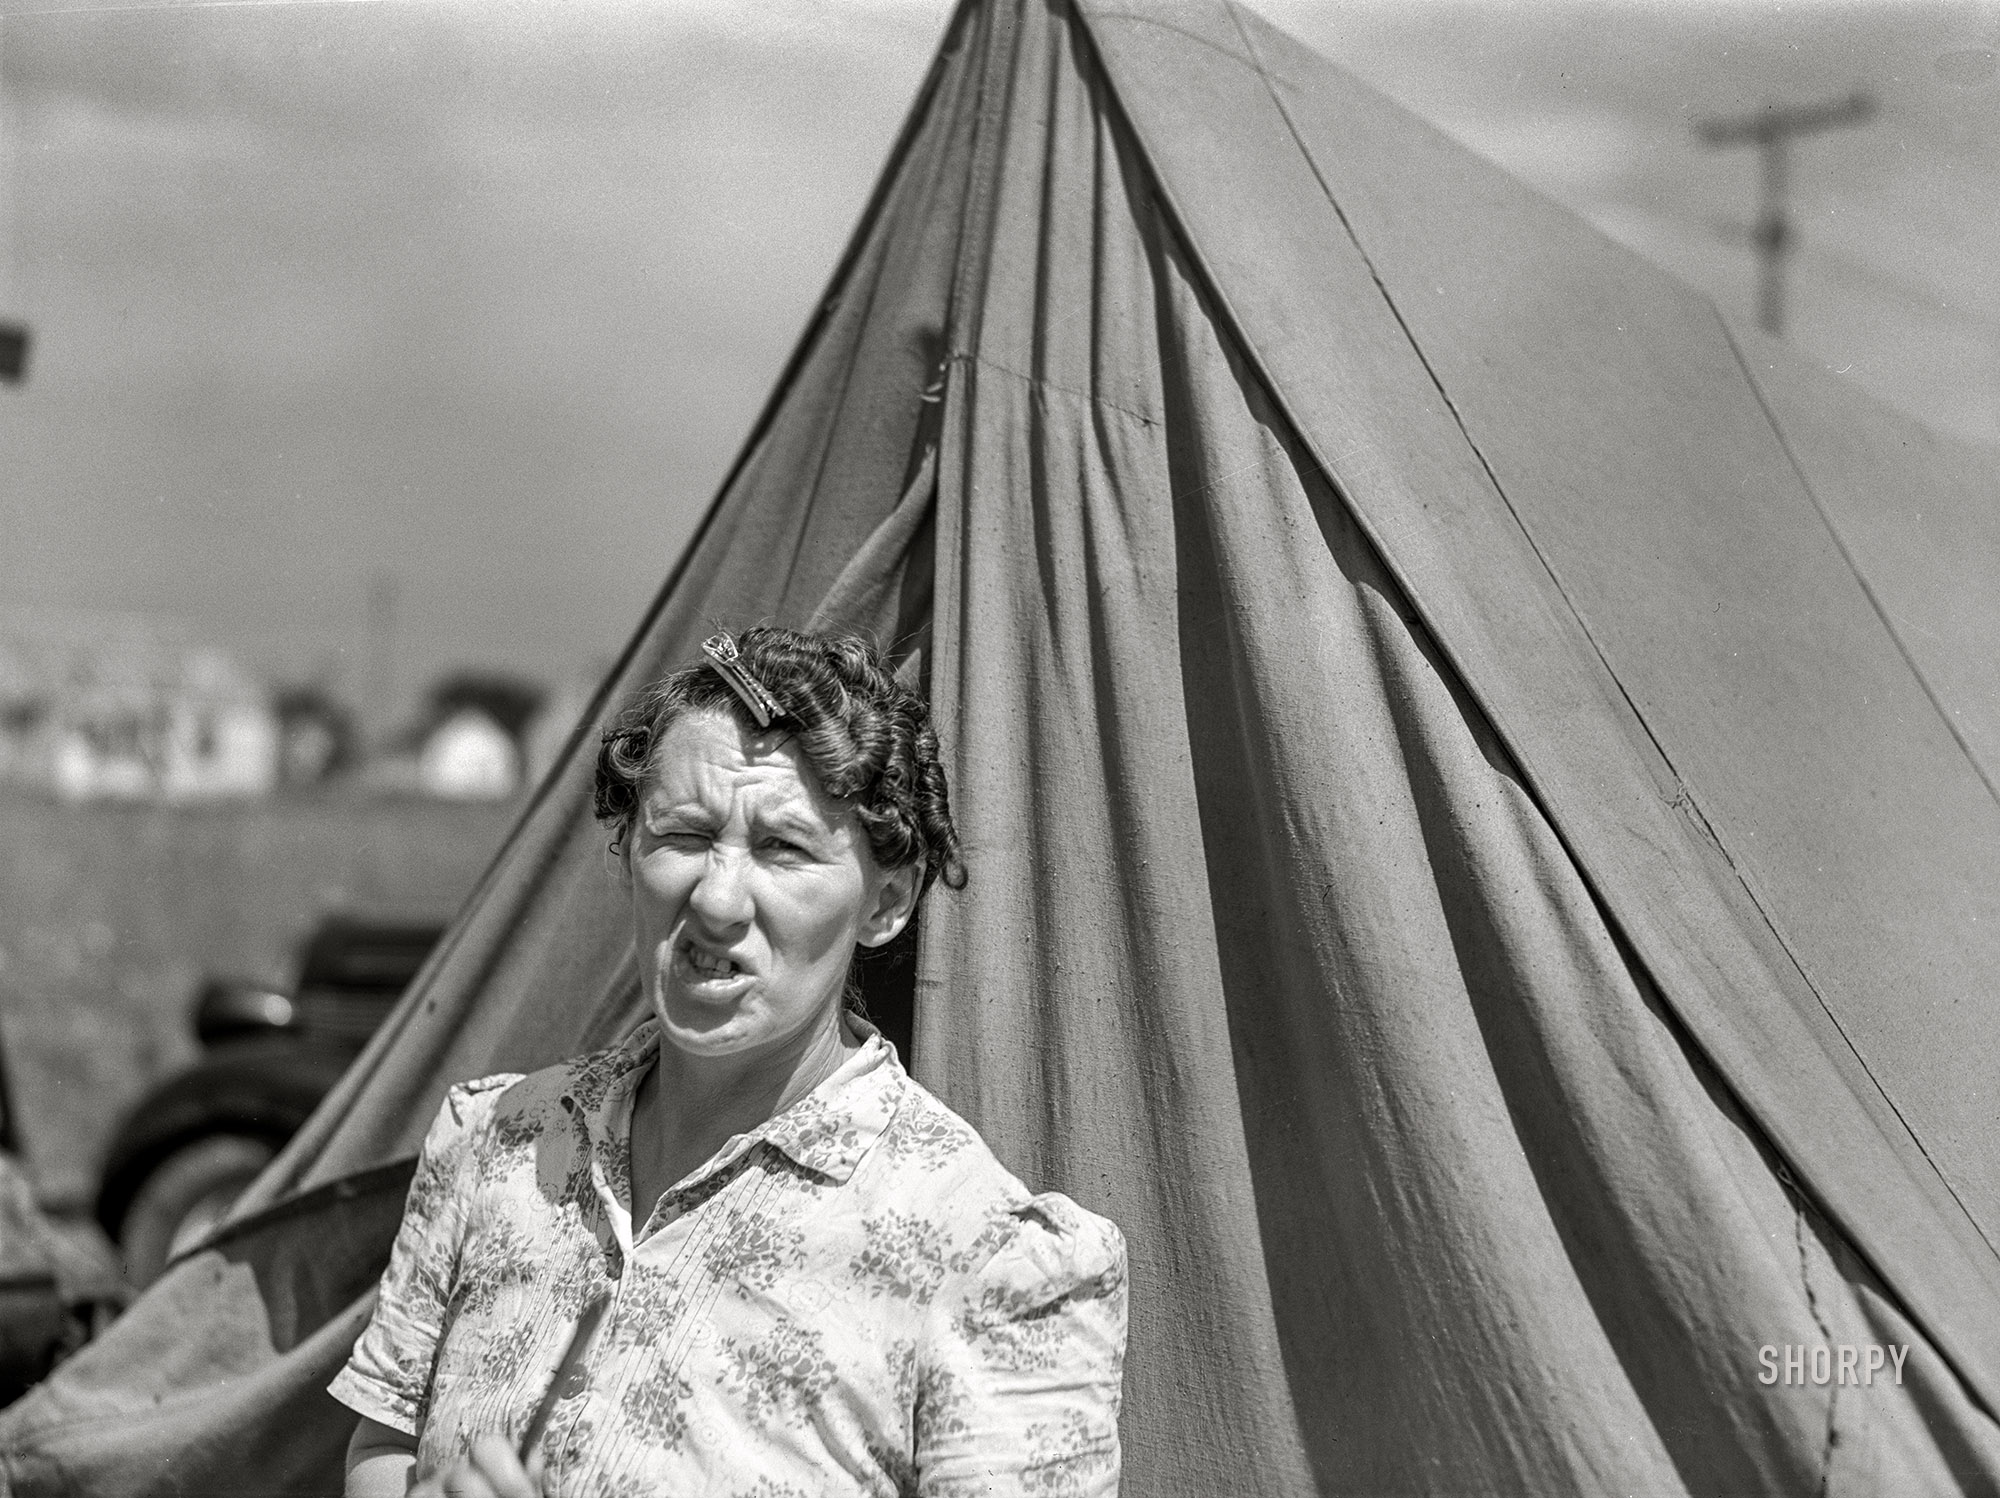 August 1941. "Mrs. Ash, wife of defense worker. They are living in a tent beside the foundation of their new home which they are building themselves. Outskirts of Detroit, Michigan." Medium format acetate negative by John Vachon for the Farm Security Administration. View full size.